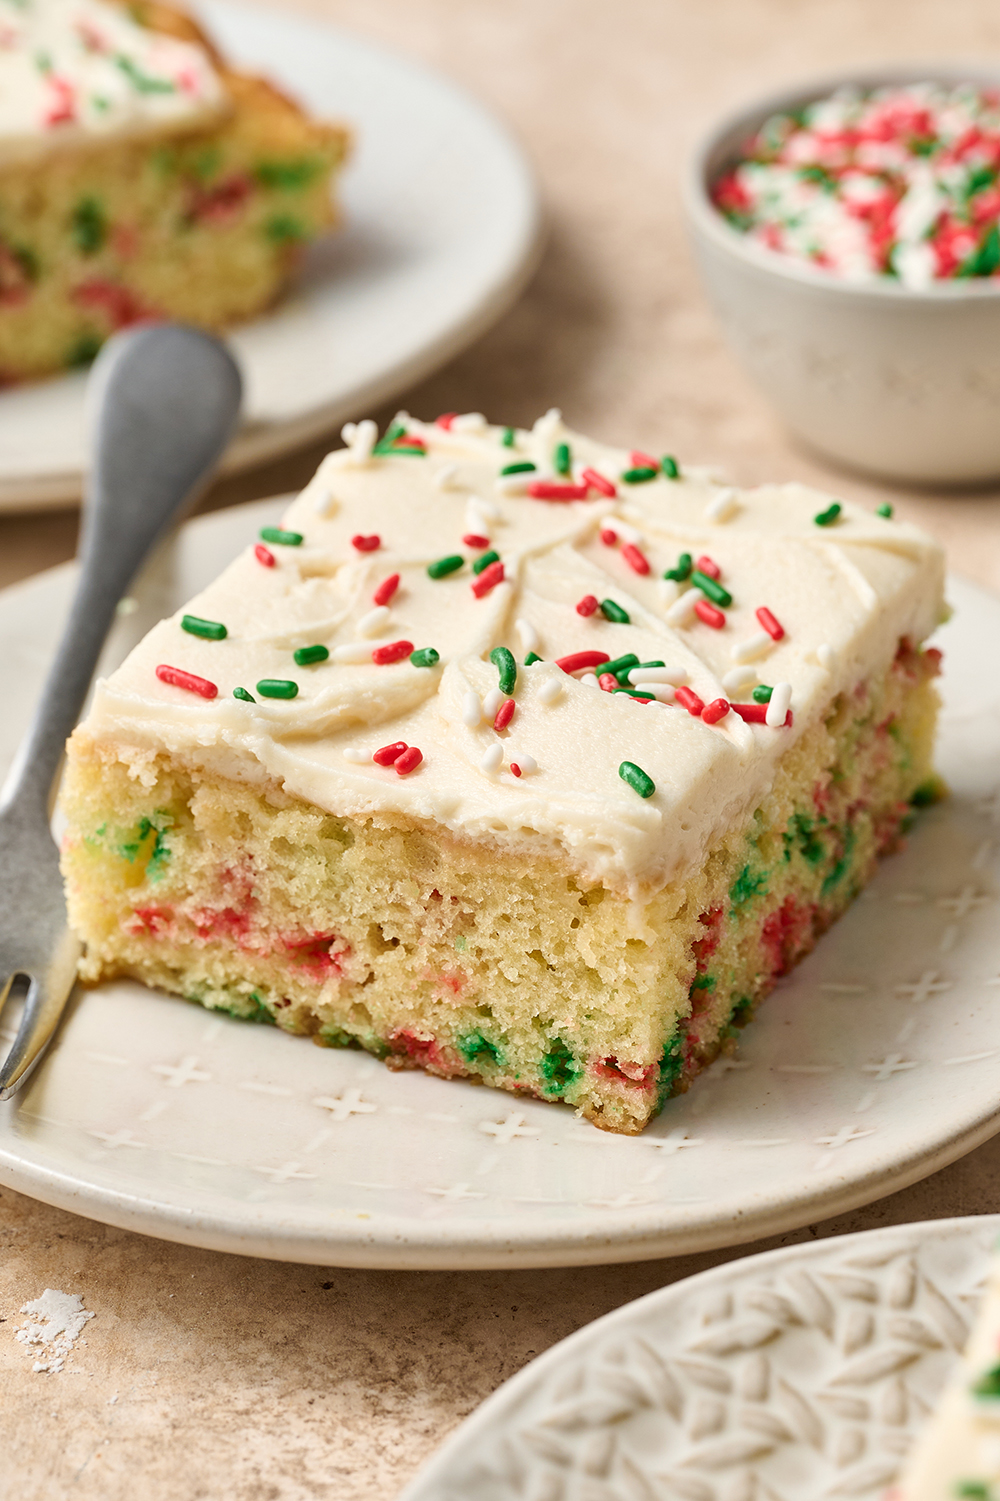 a slice of iced cake with sprinkles, on a plate with a fork to serve.